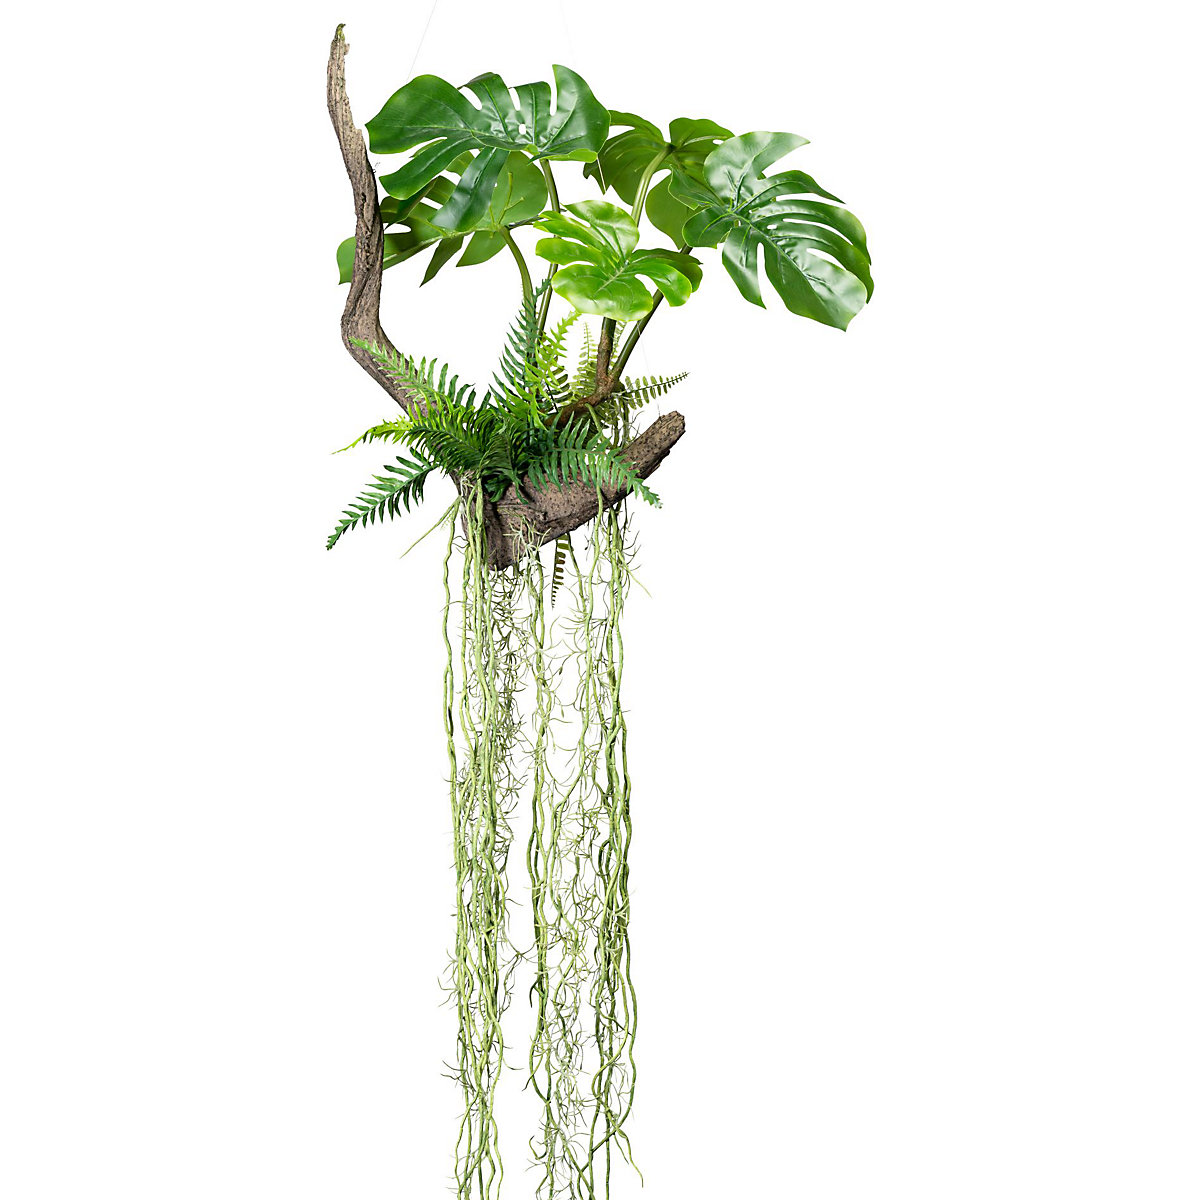 Swiss cheese plant on roots